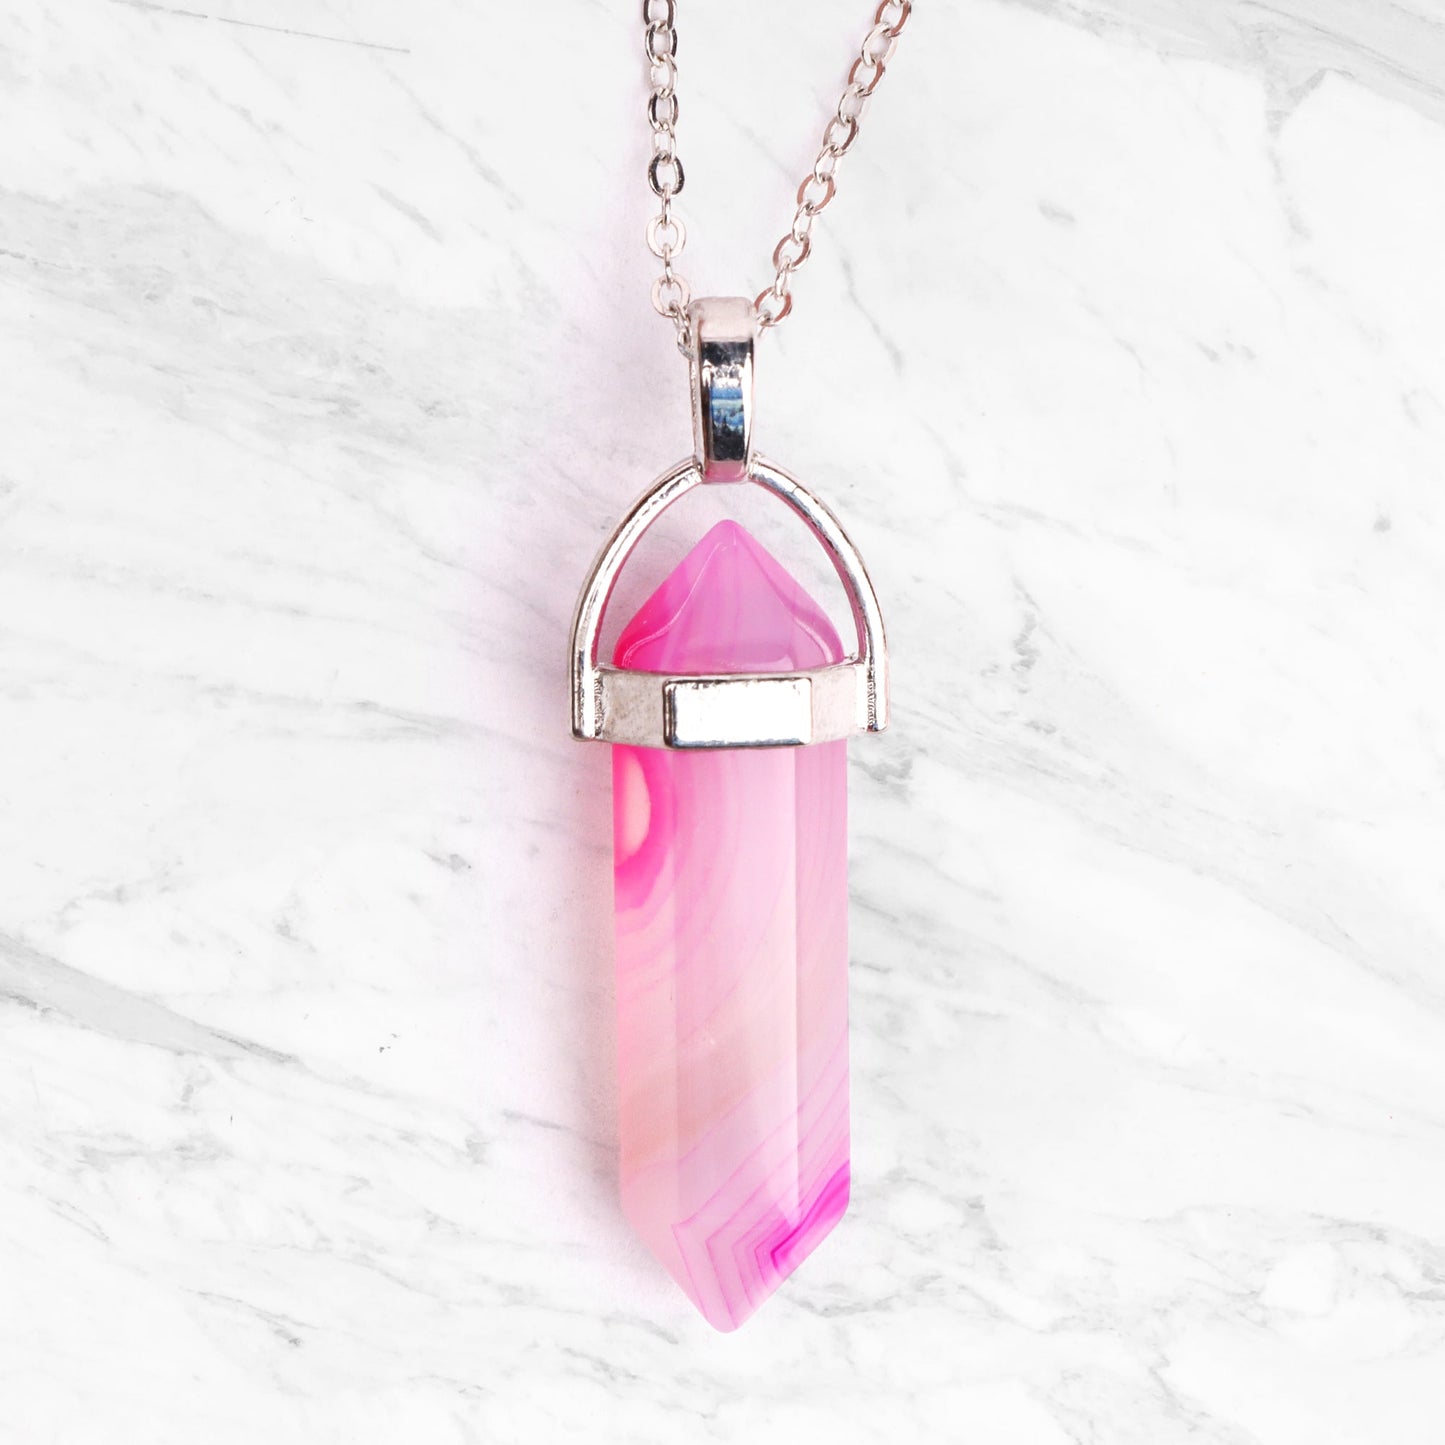 Silver Plated Necklace - Pink Agate Pendant